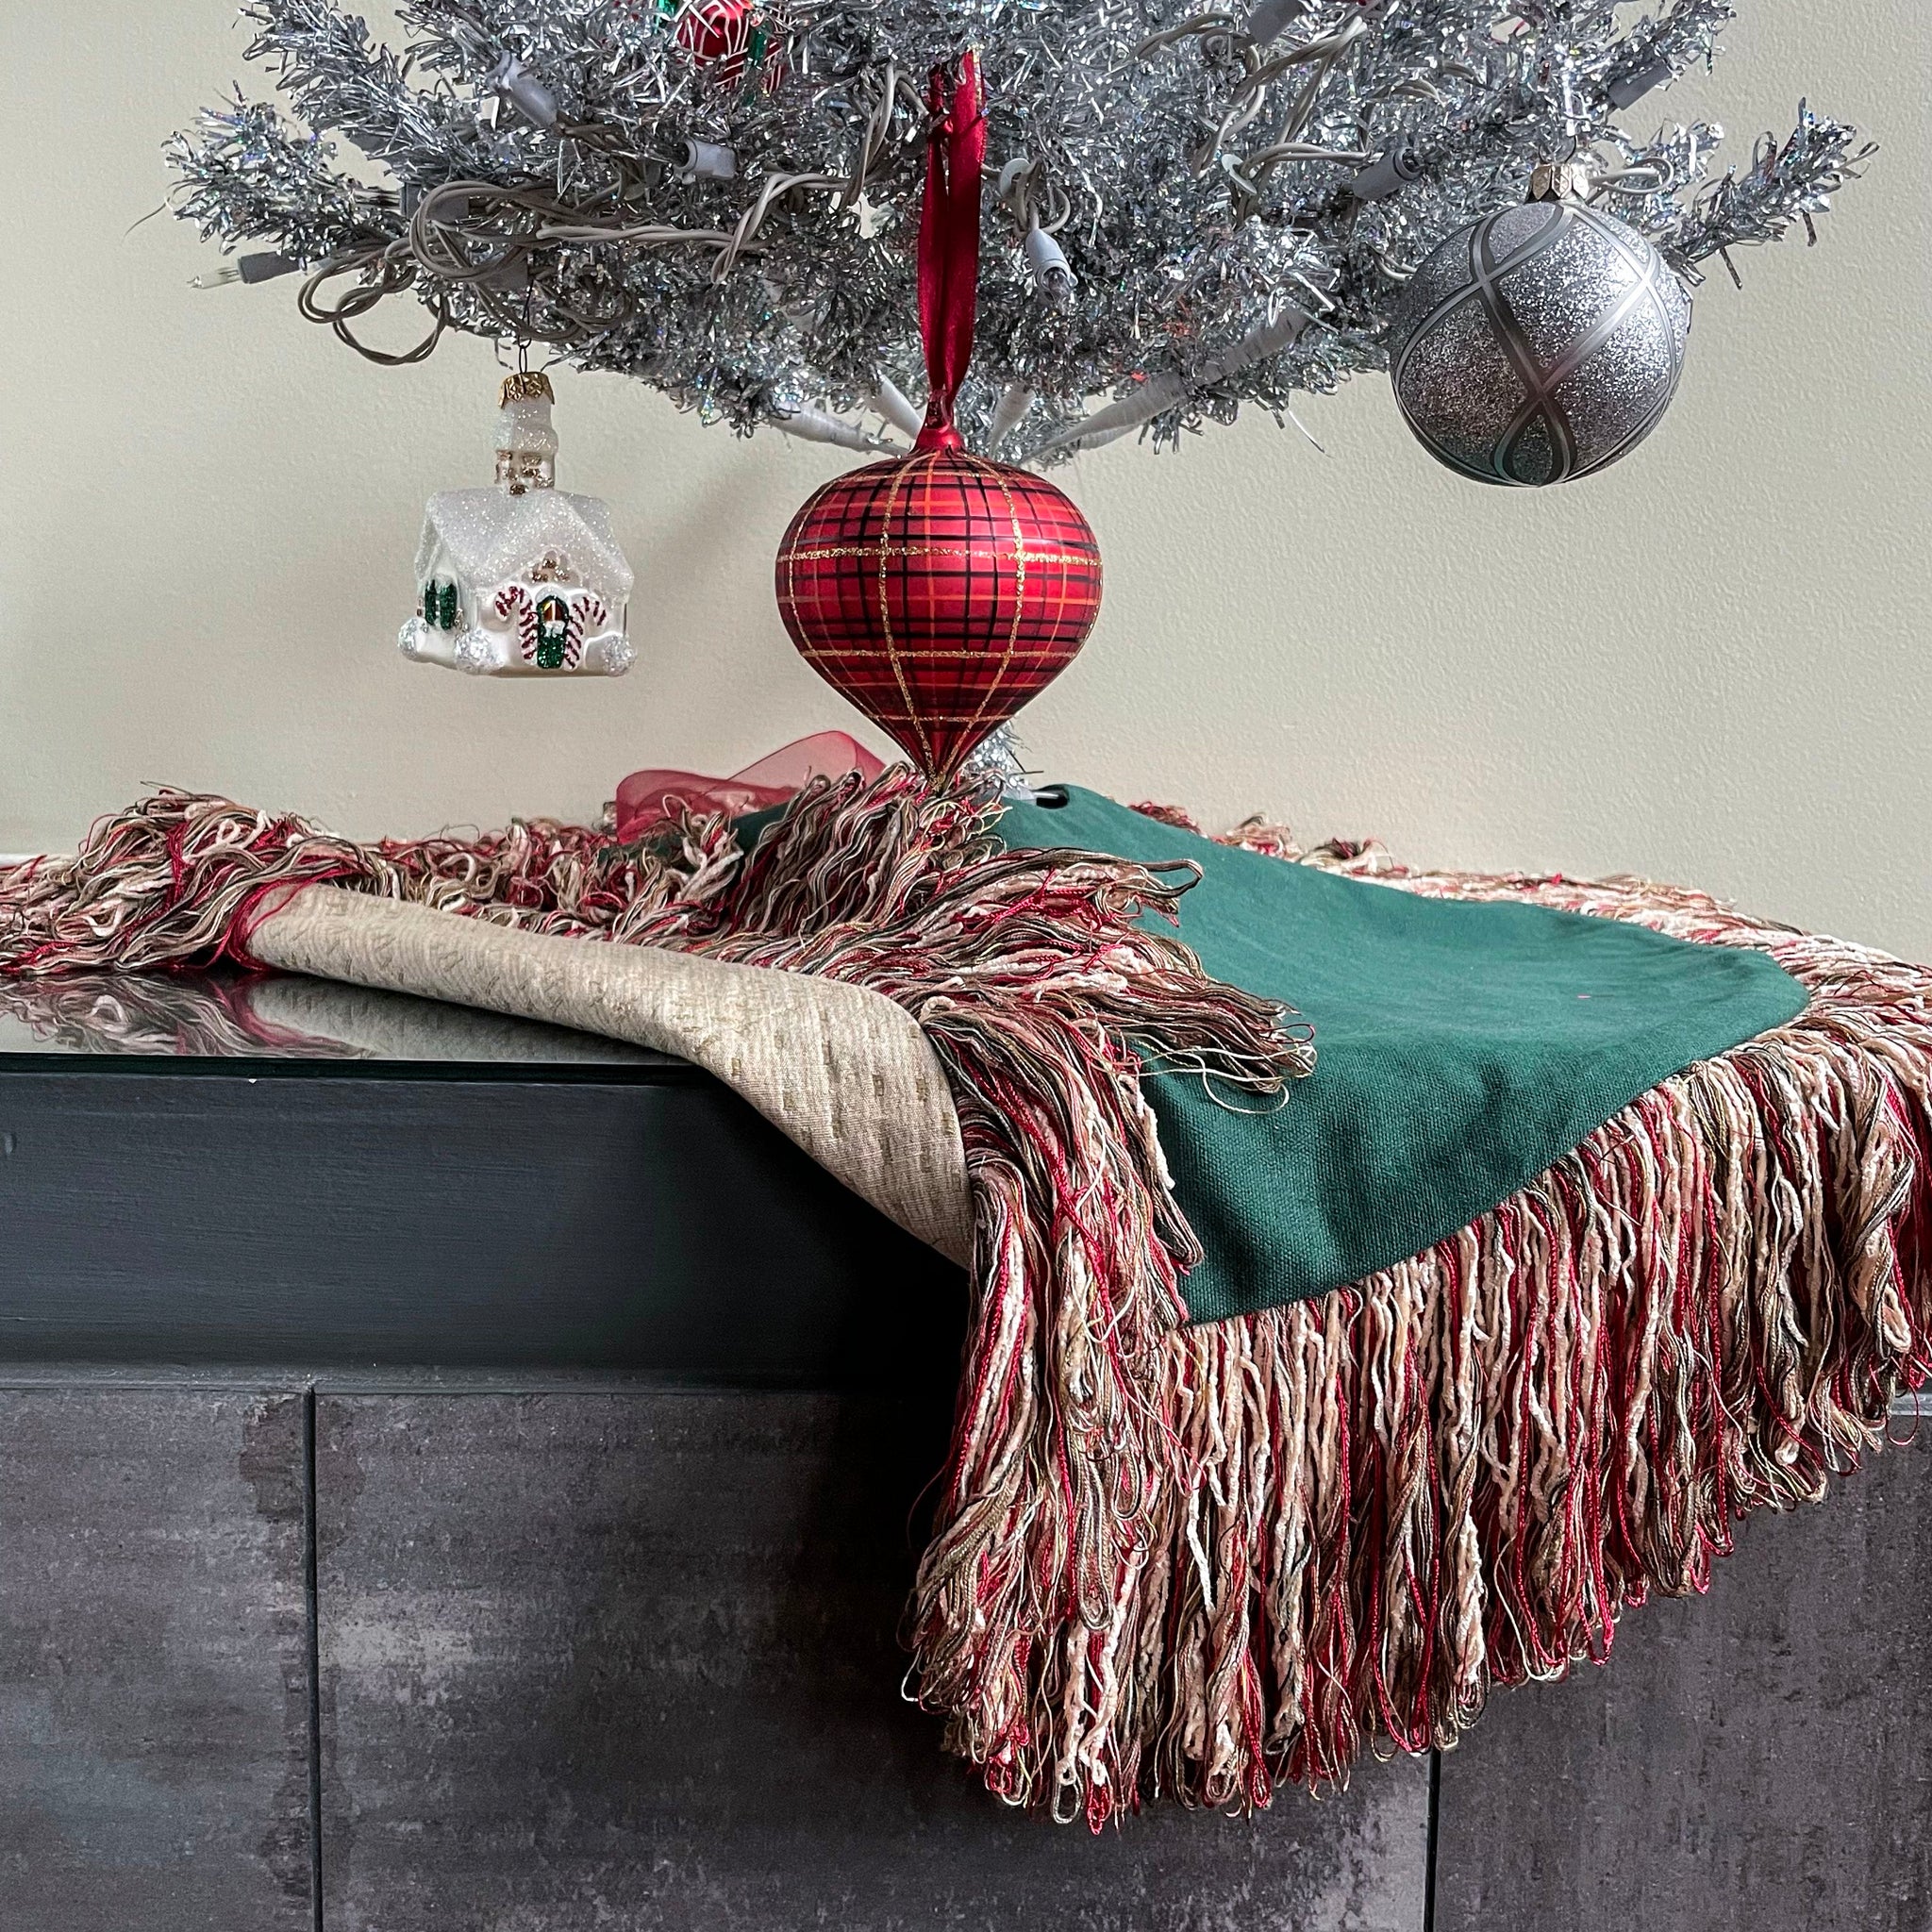 24" Neutral and Green Tabletop Christmas Tree Skirt with 5" Fringe | Reversible